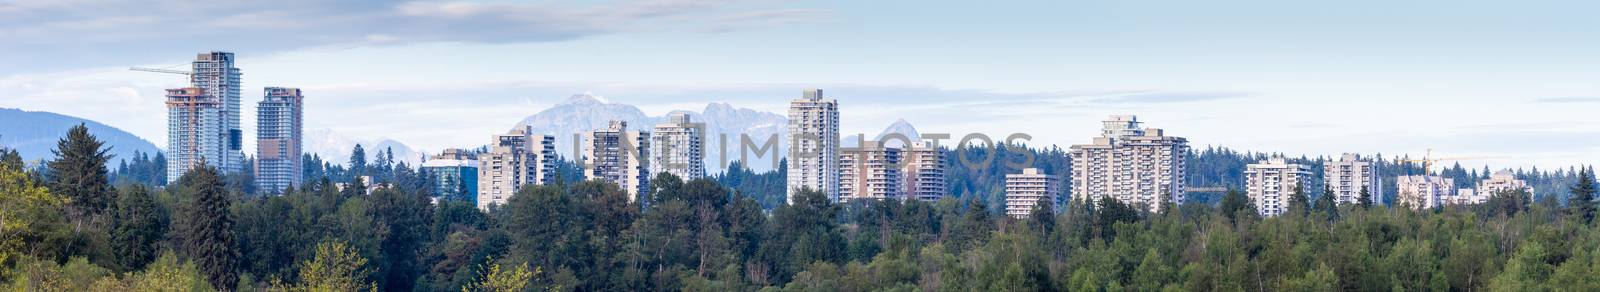 Panorama of the Burnaby, British Columbia, Canada apartment deve by kingmaphotos